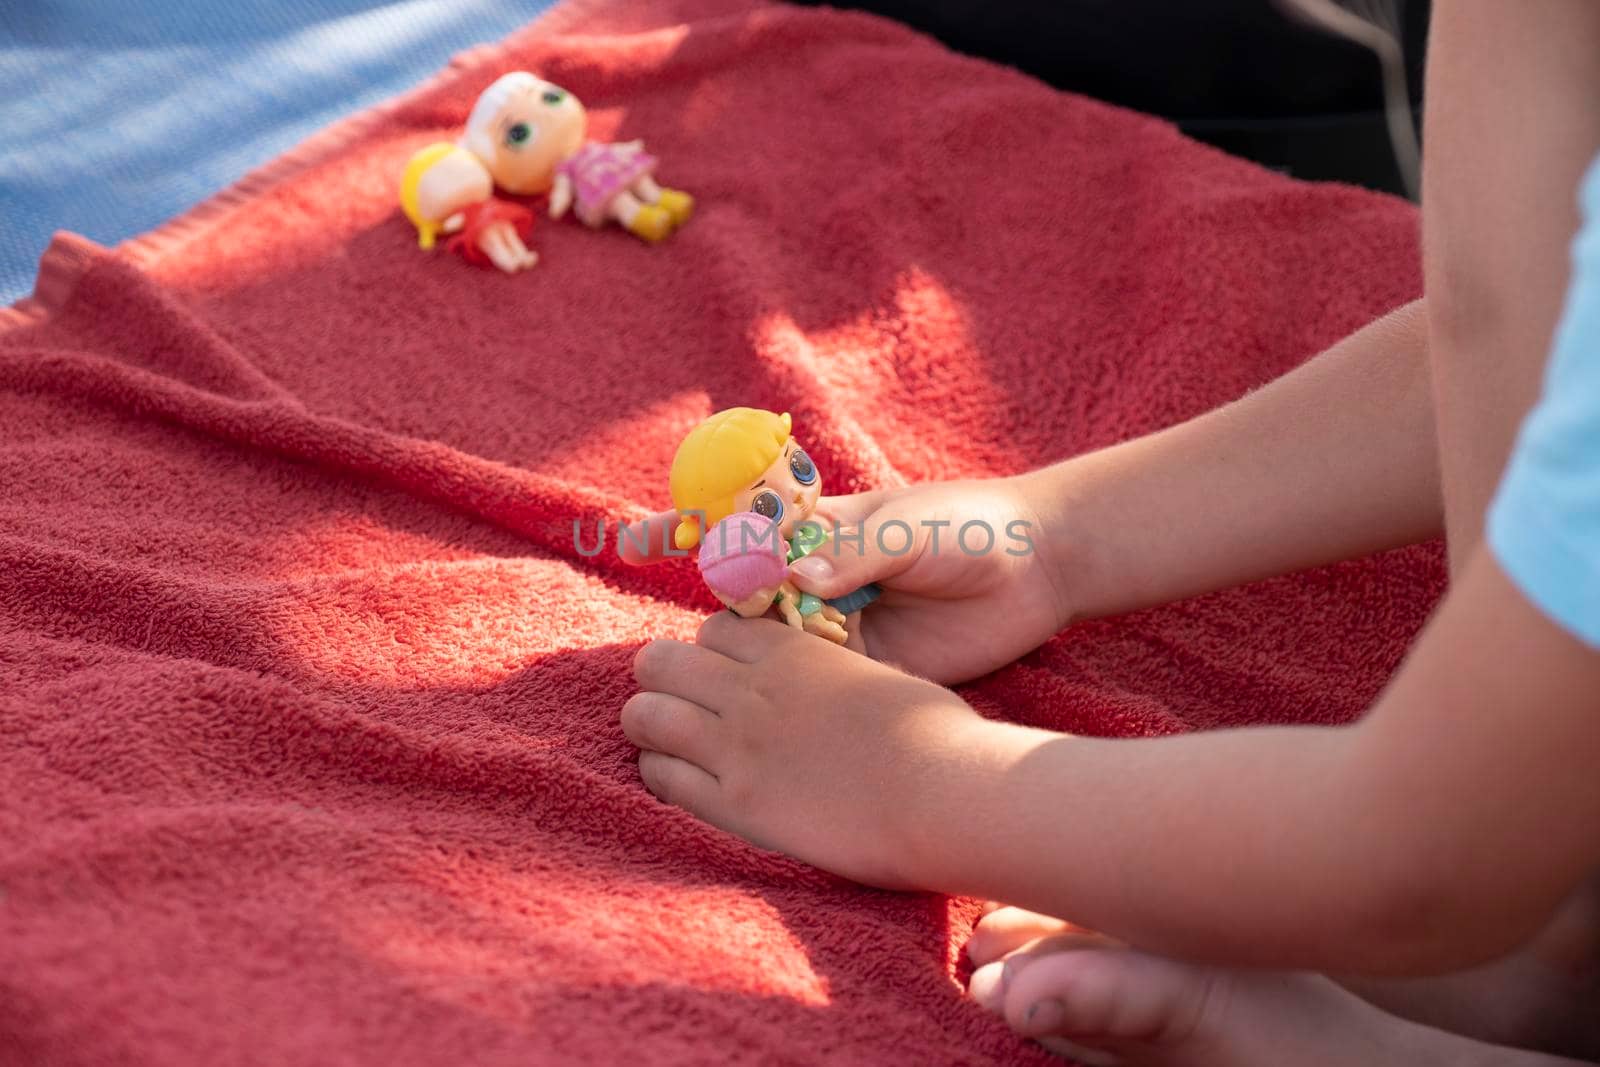 Cute girl playing with her dolls on a sunbed on a sandy beach on a sunny day.